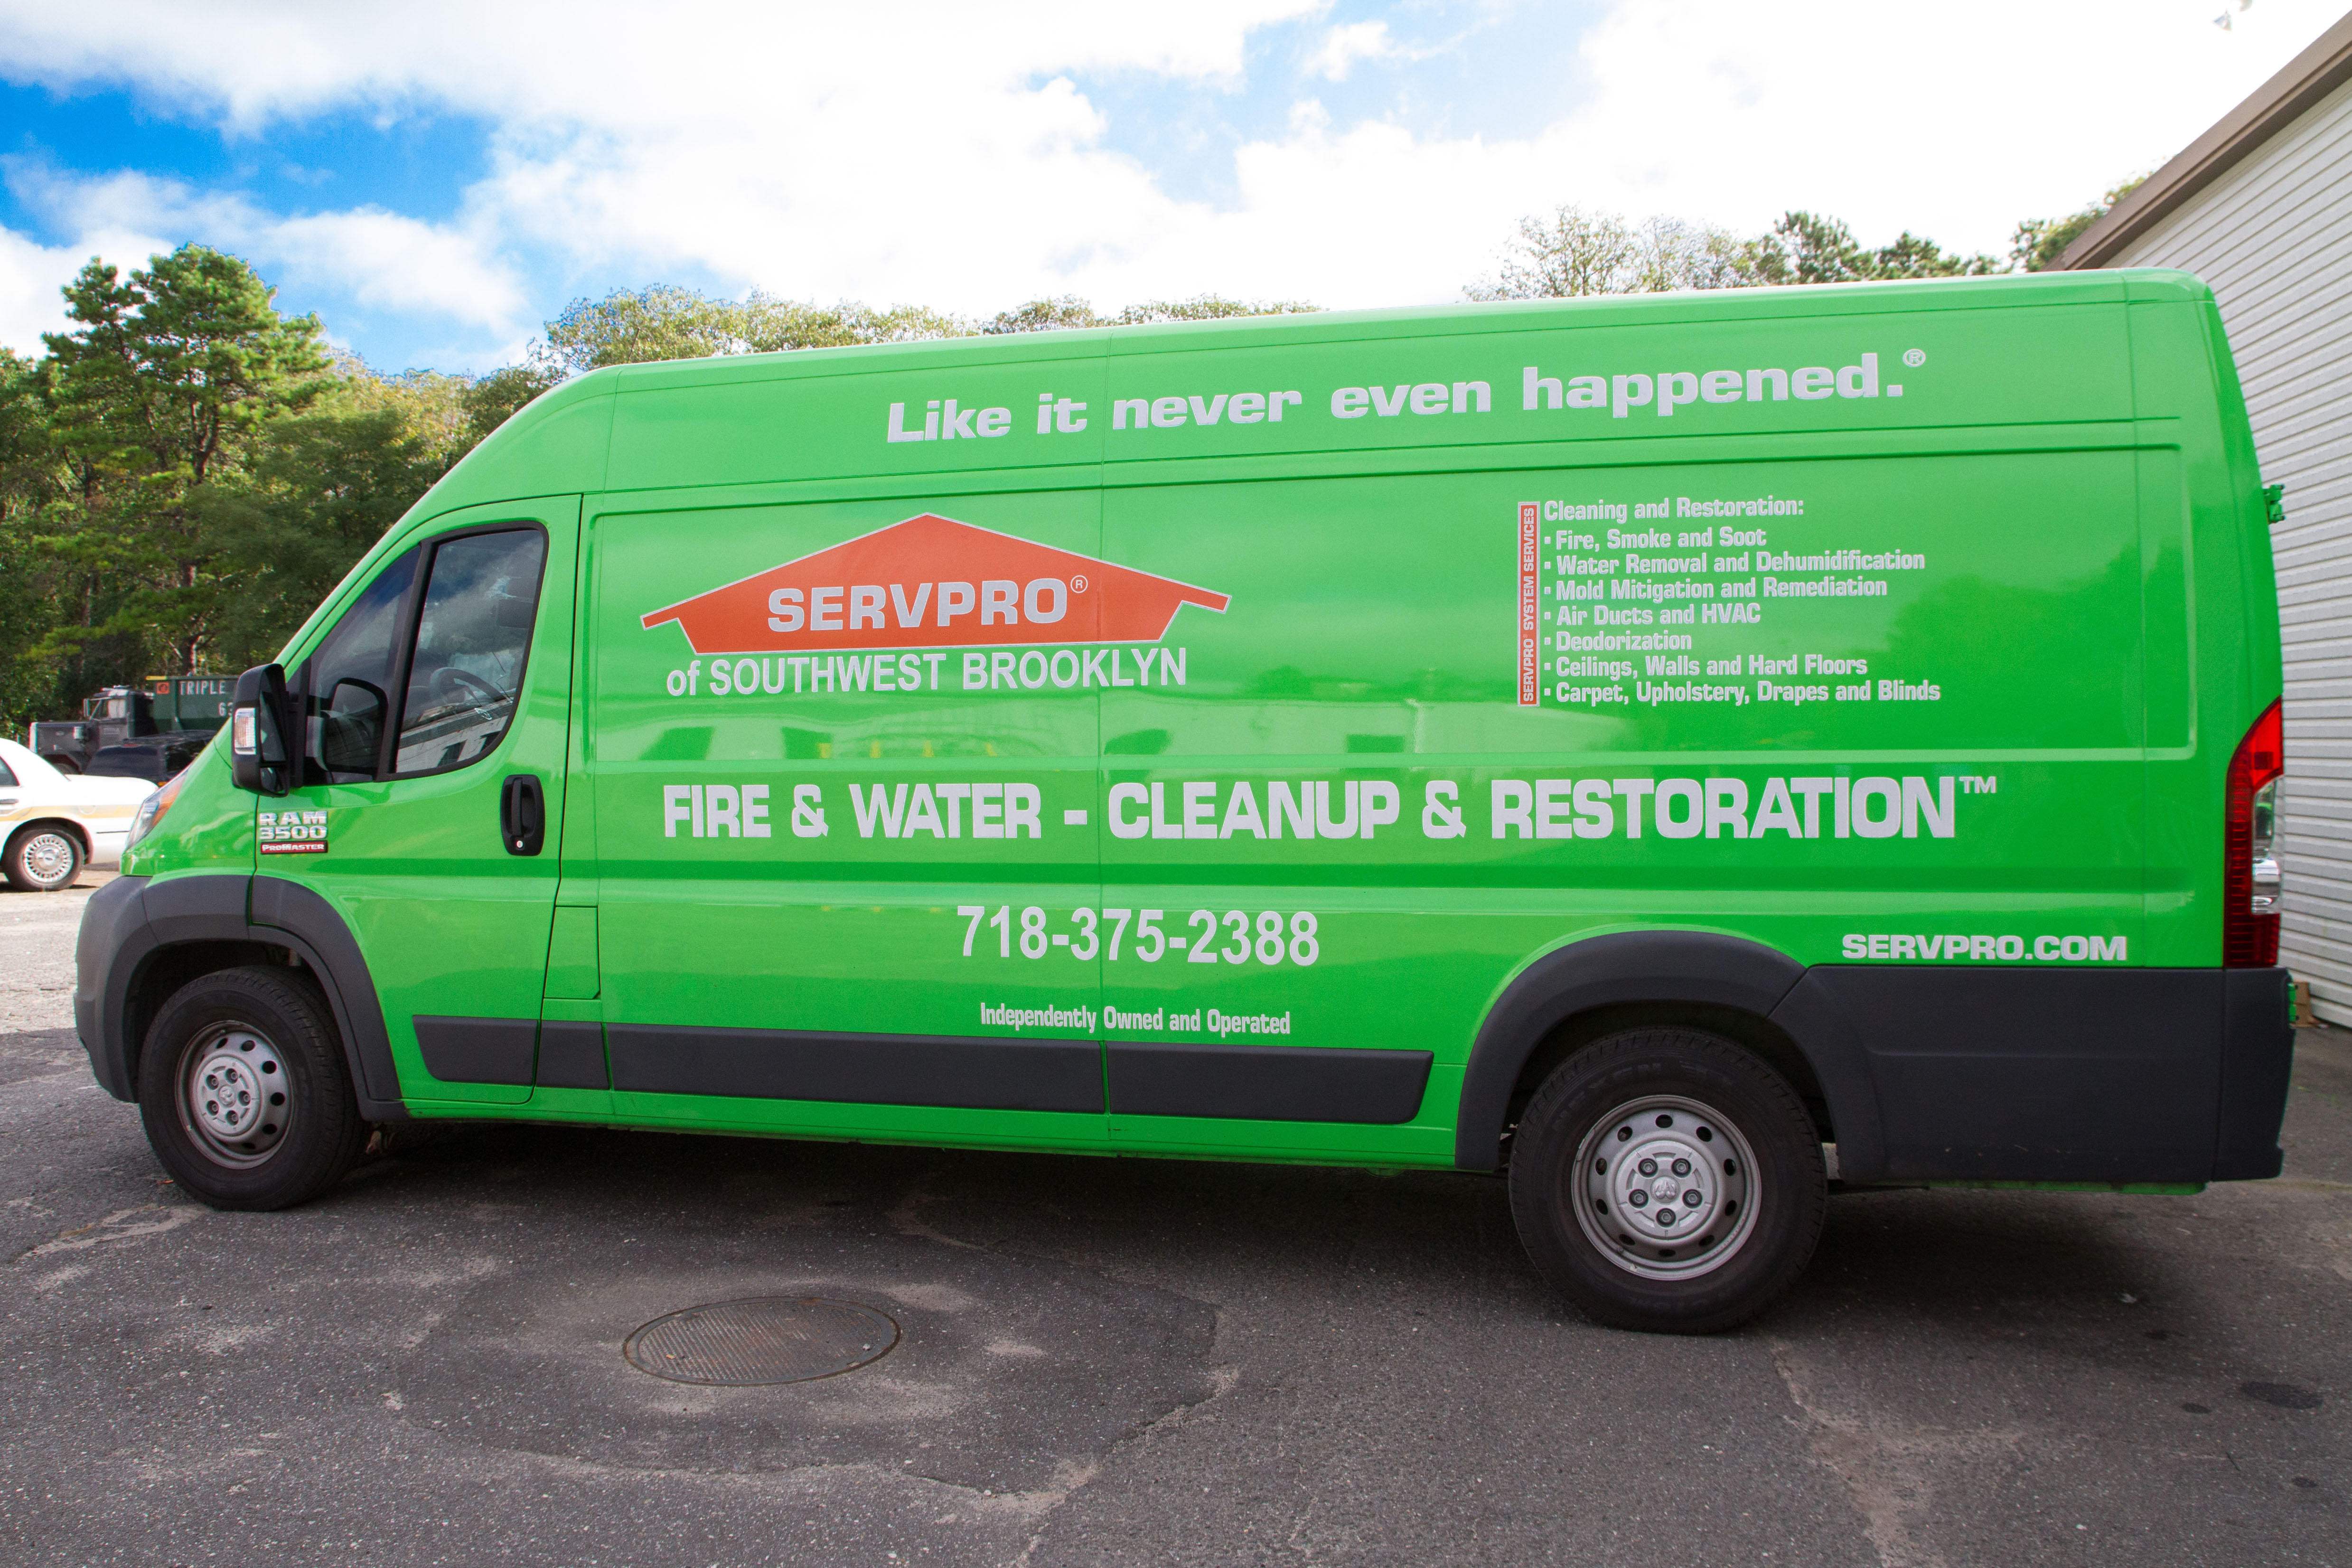 SERVPRO service van ready to help with Brooklyn property damage restoration services, 24 hour emergency fire and water damage restoration service available